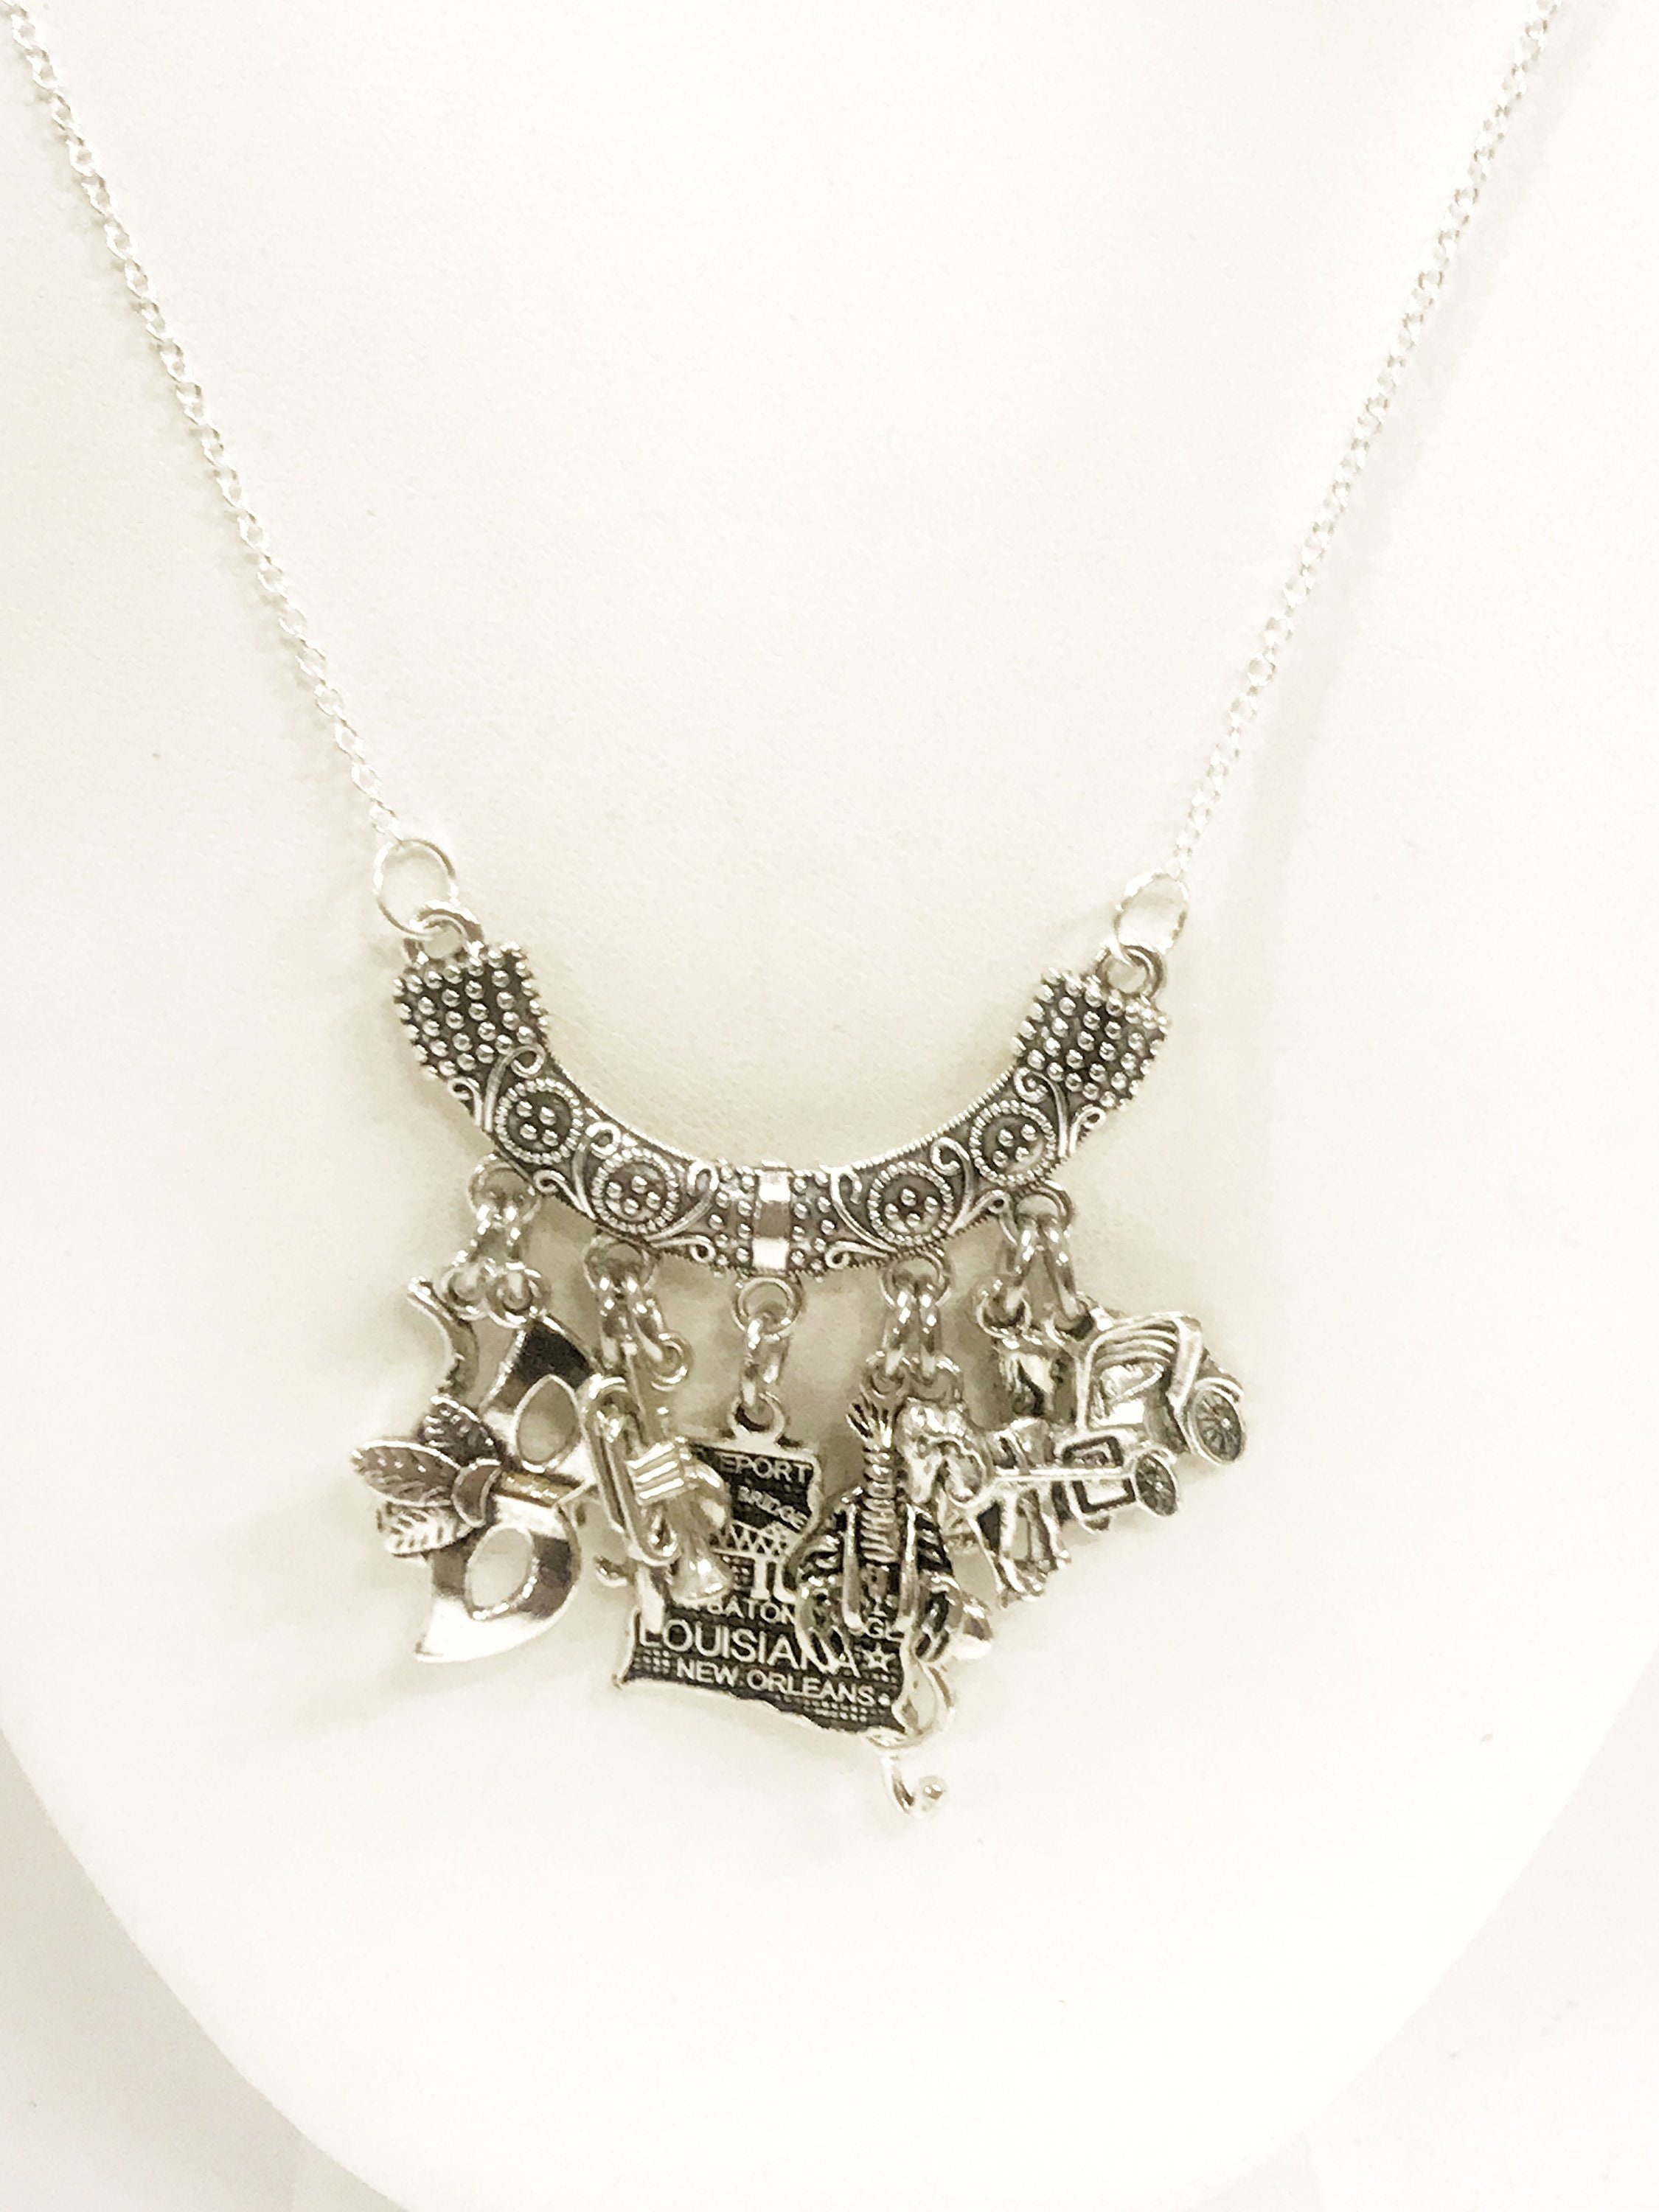 New Orleans Louisiana Silver Plated Necklace